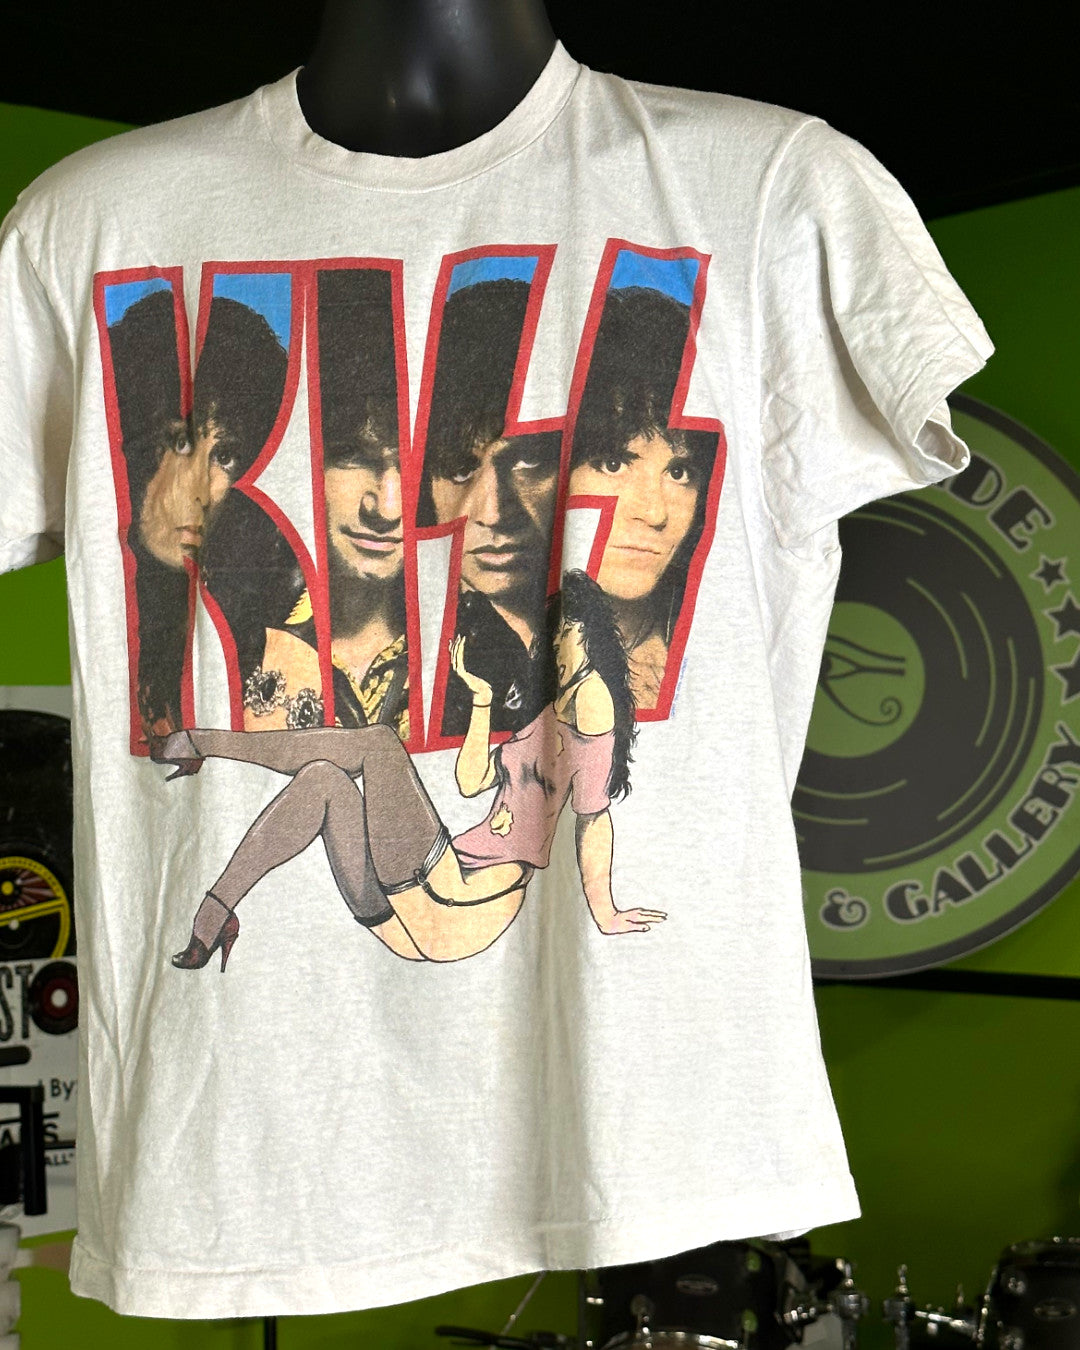 Kiss 1987 Crazy Nights Lady T-Shirt, White, S (Measures 25” Long, 18.5” Pit To Pit) - Darkside Records